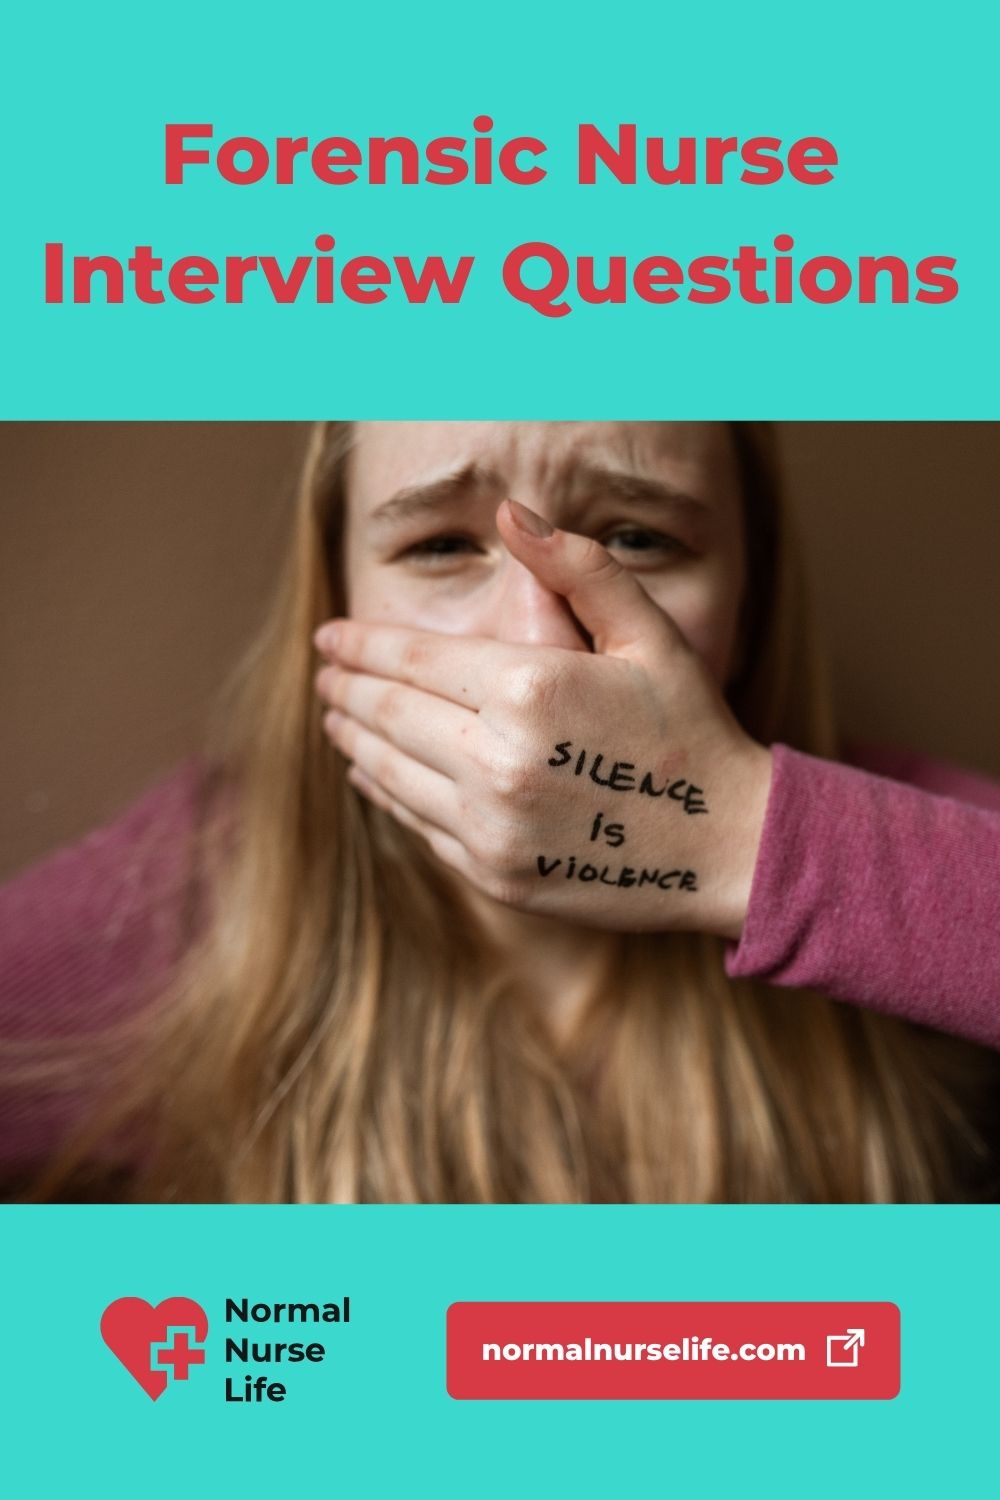 Forensic nurse examiner interview questions